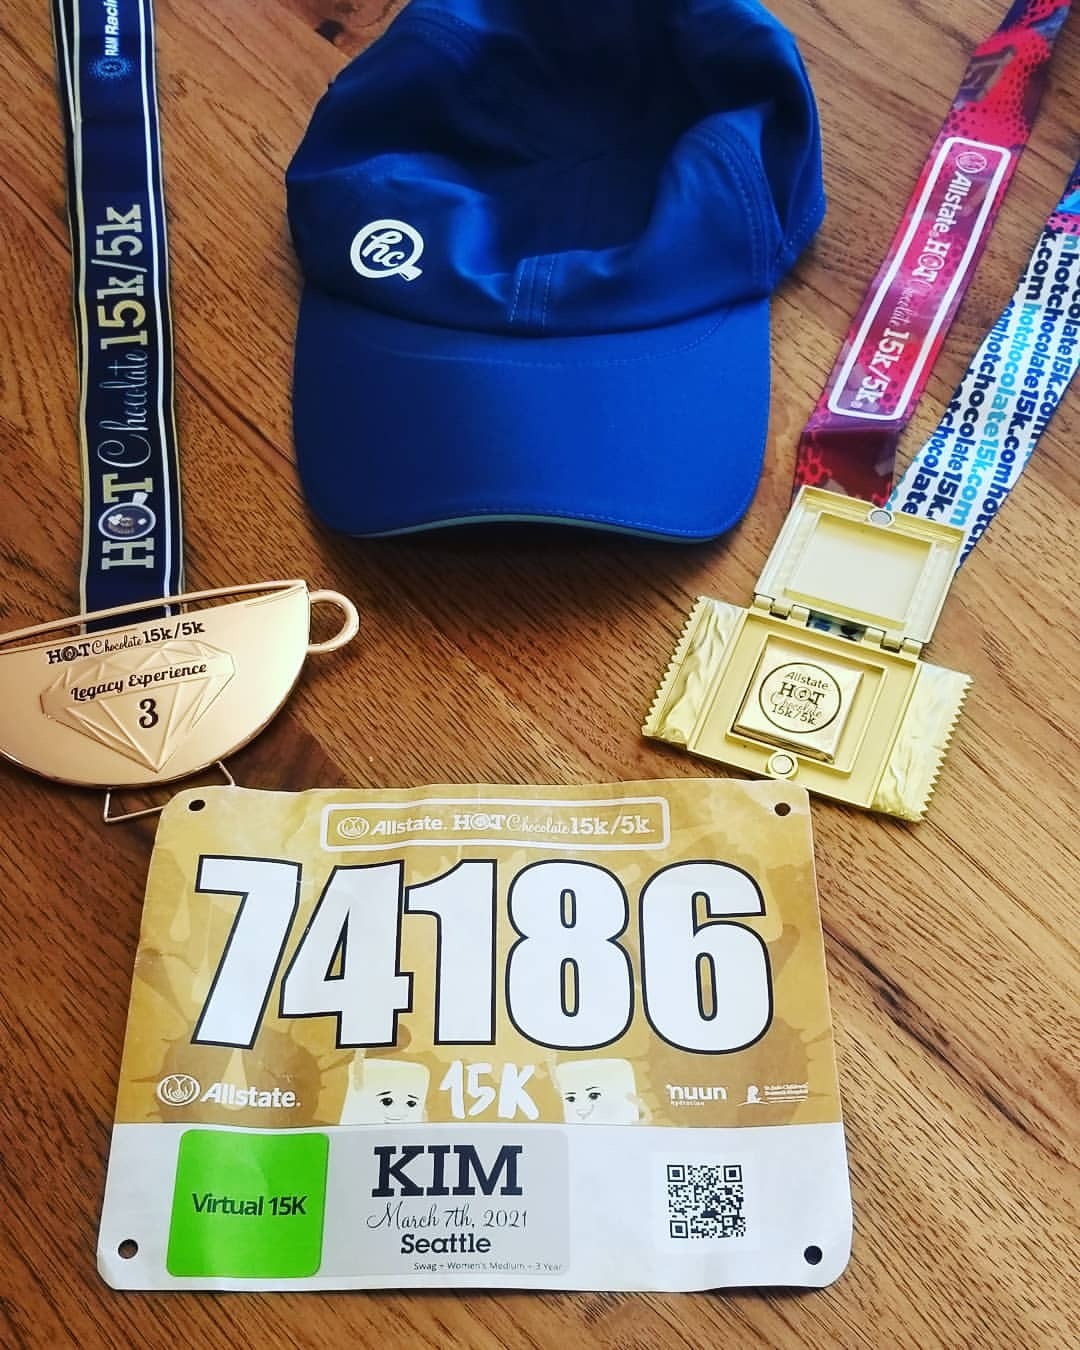 Hey guys….I made it! Did the Hot Chocolate 15k today. I’ve been a little under the weather so it was a bit of a toughie. Had to walk a little of it. Made it though and celebrated with the little piece of chocolate that was hidden in my medal...